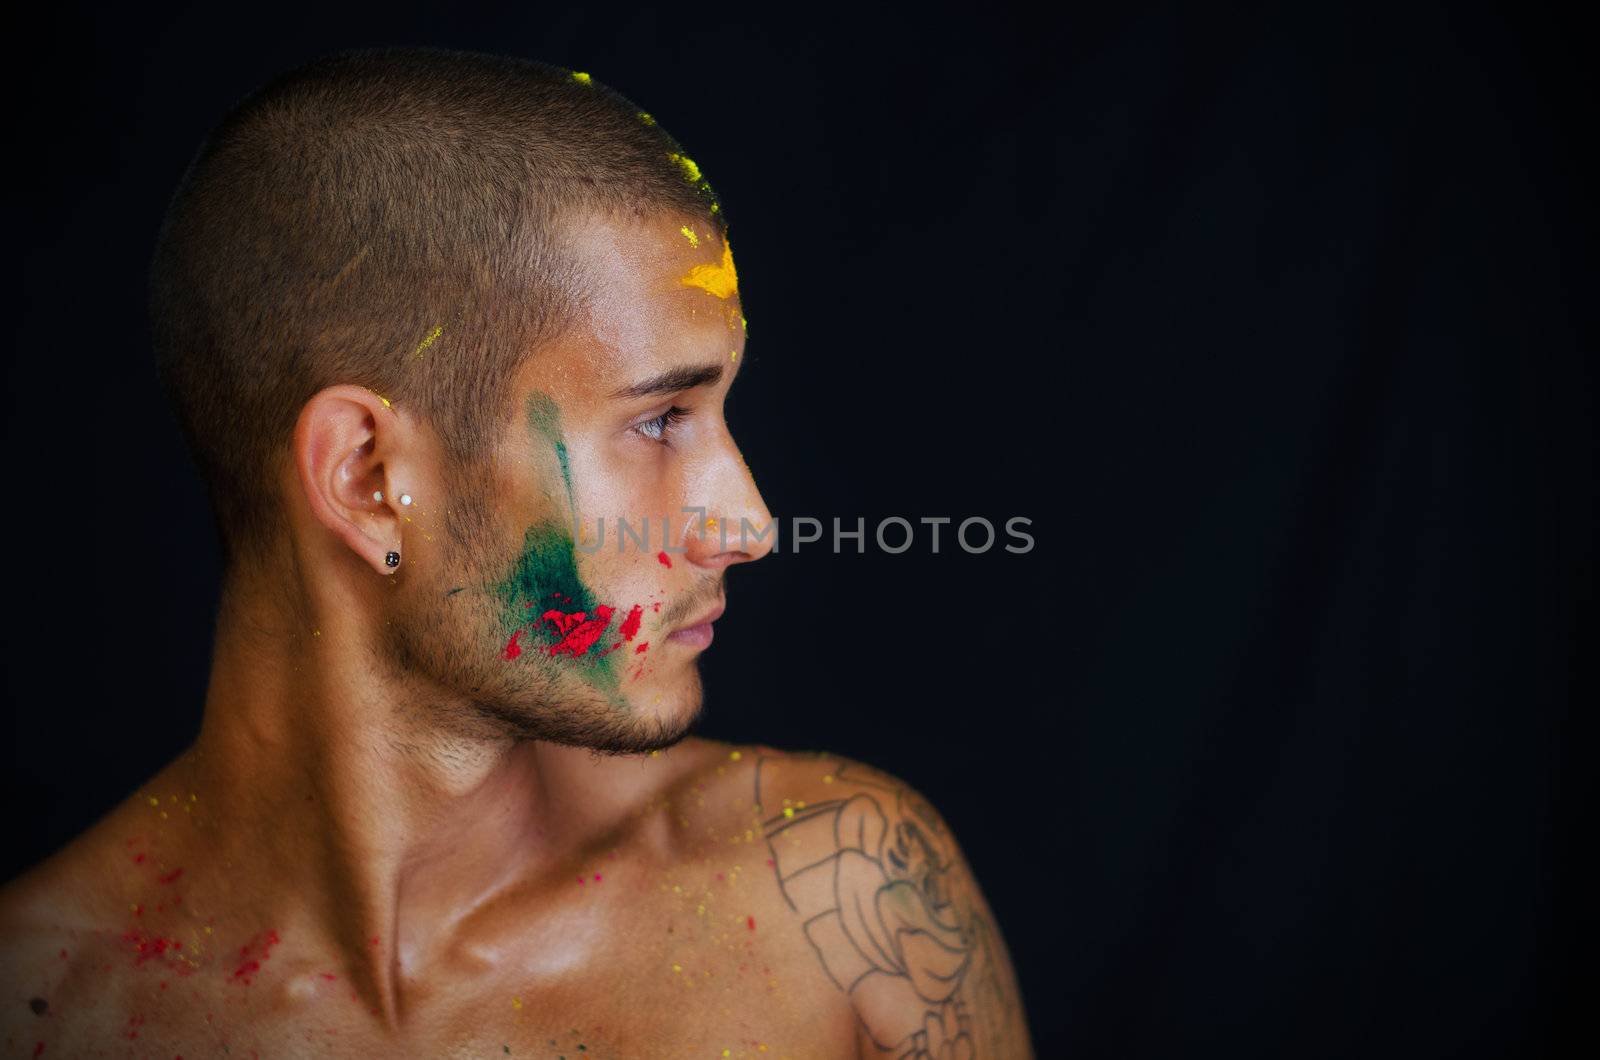 Attractive young man shirtless, skin painted all over with bright colors looking to a side, profile view